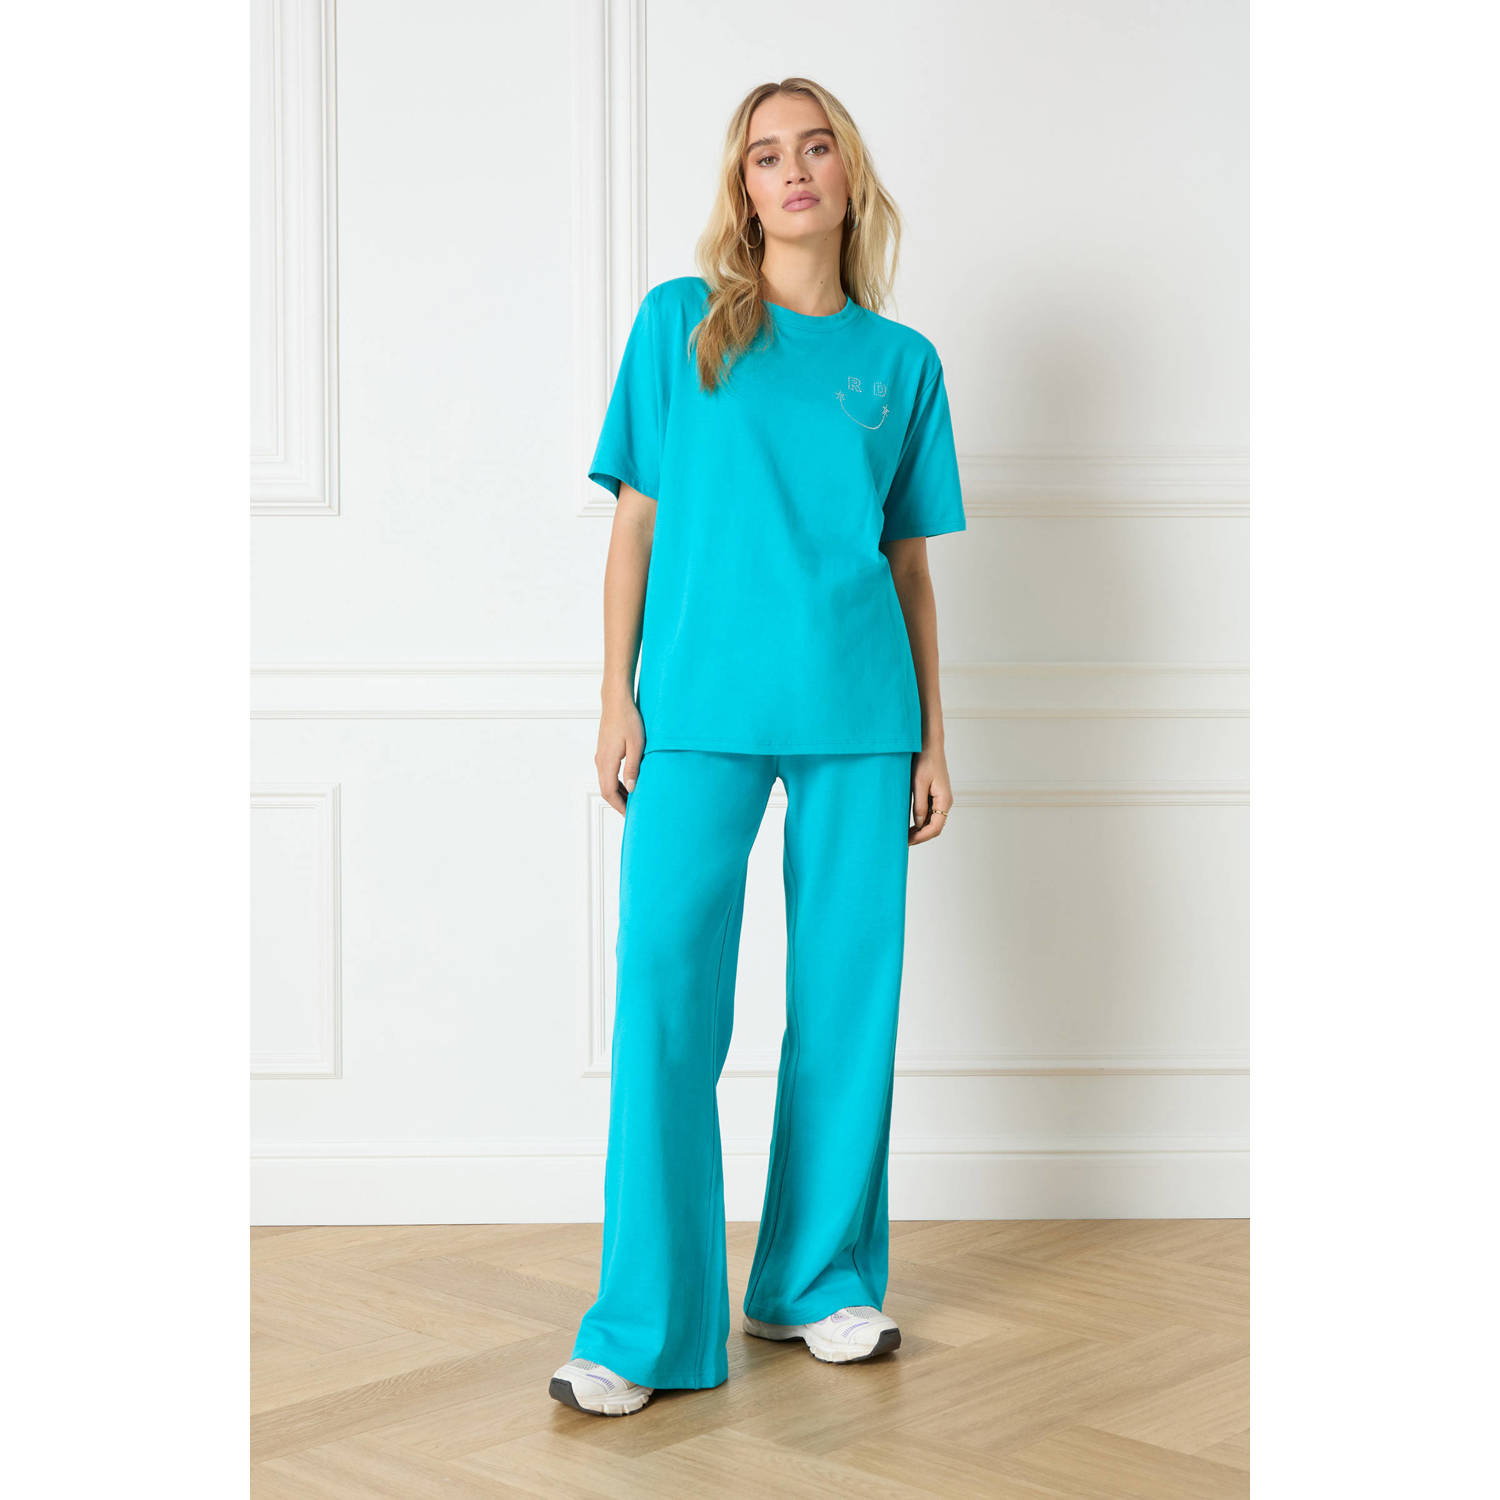 Refined Department high waist loose fit sweatpants Dion turquoise